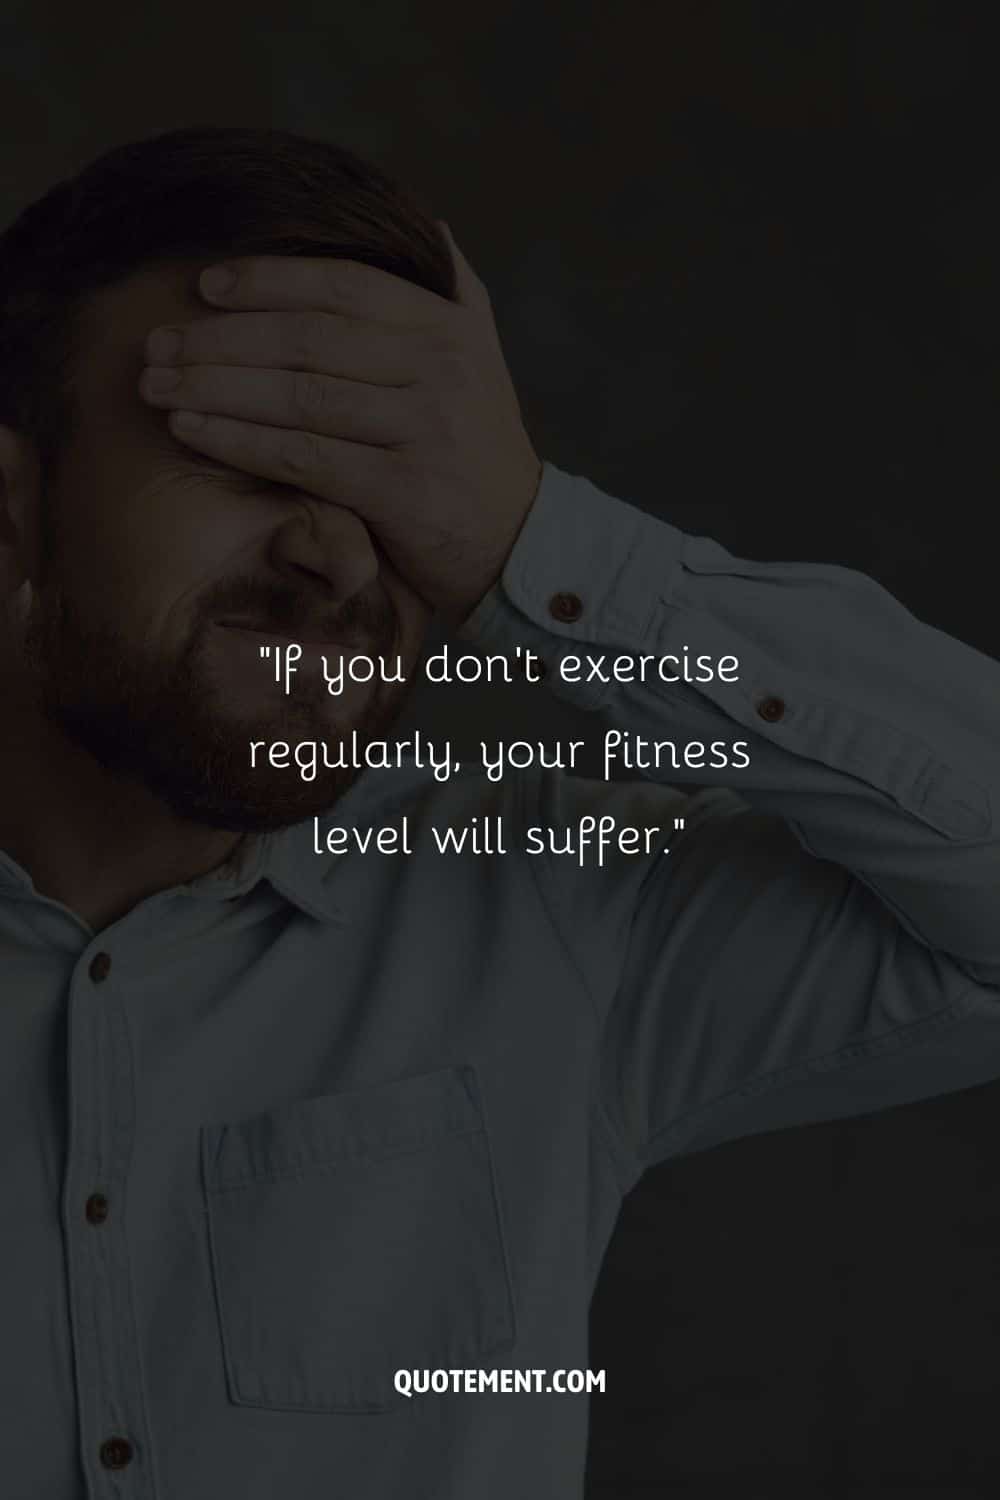 If you don't exercise regularly, your fitness level will suffer.